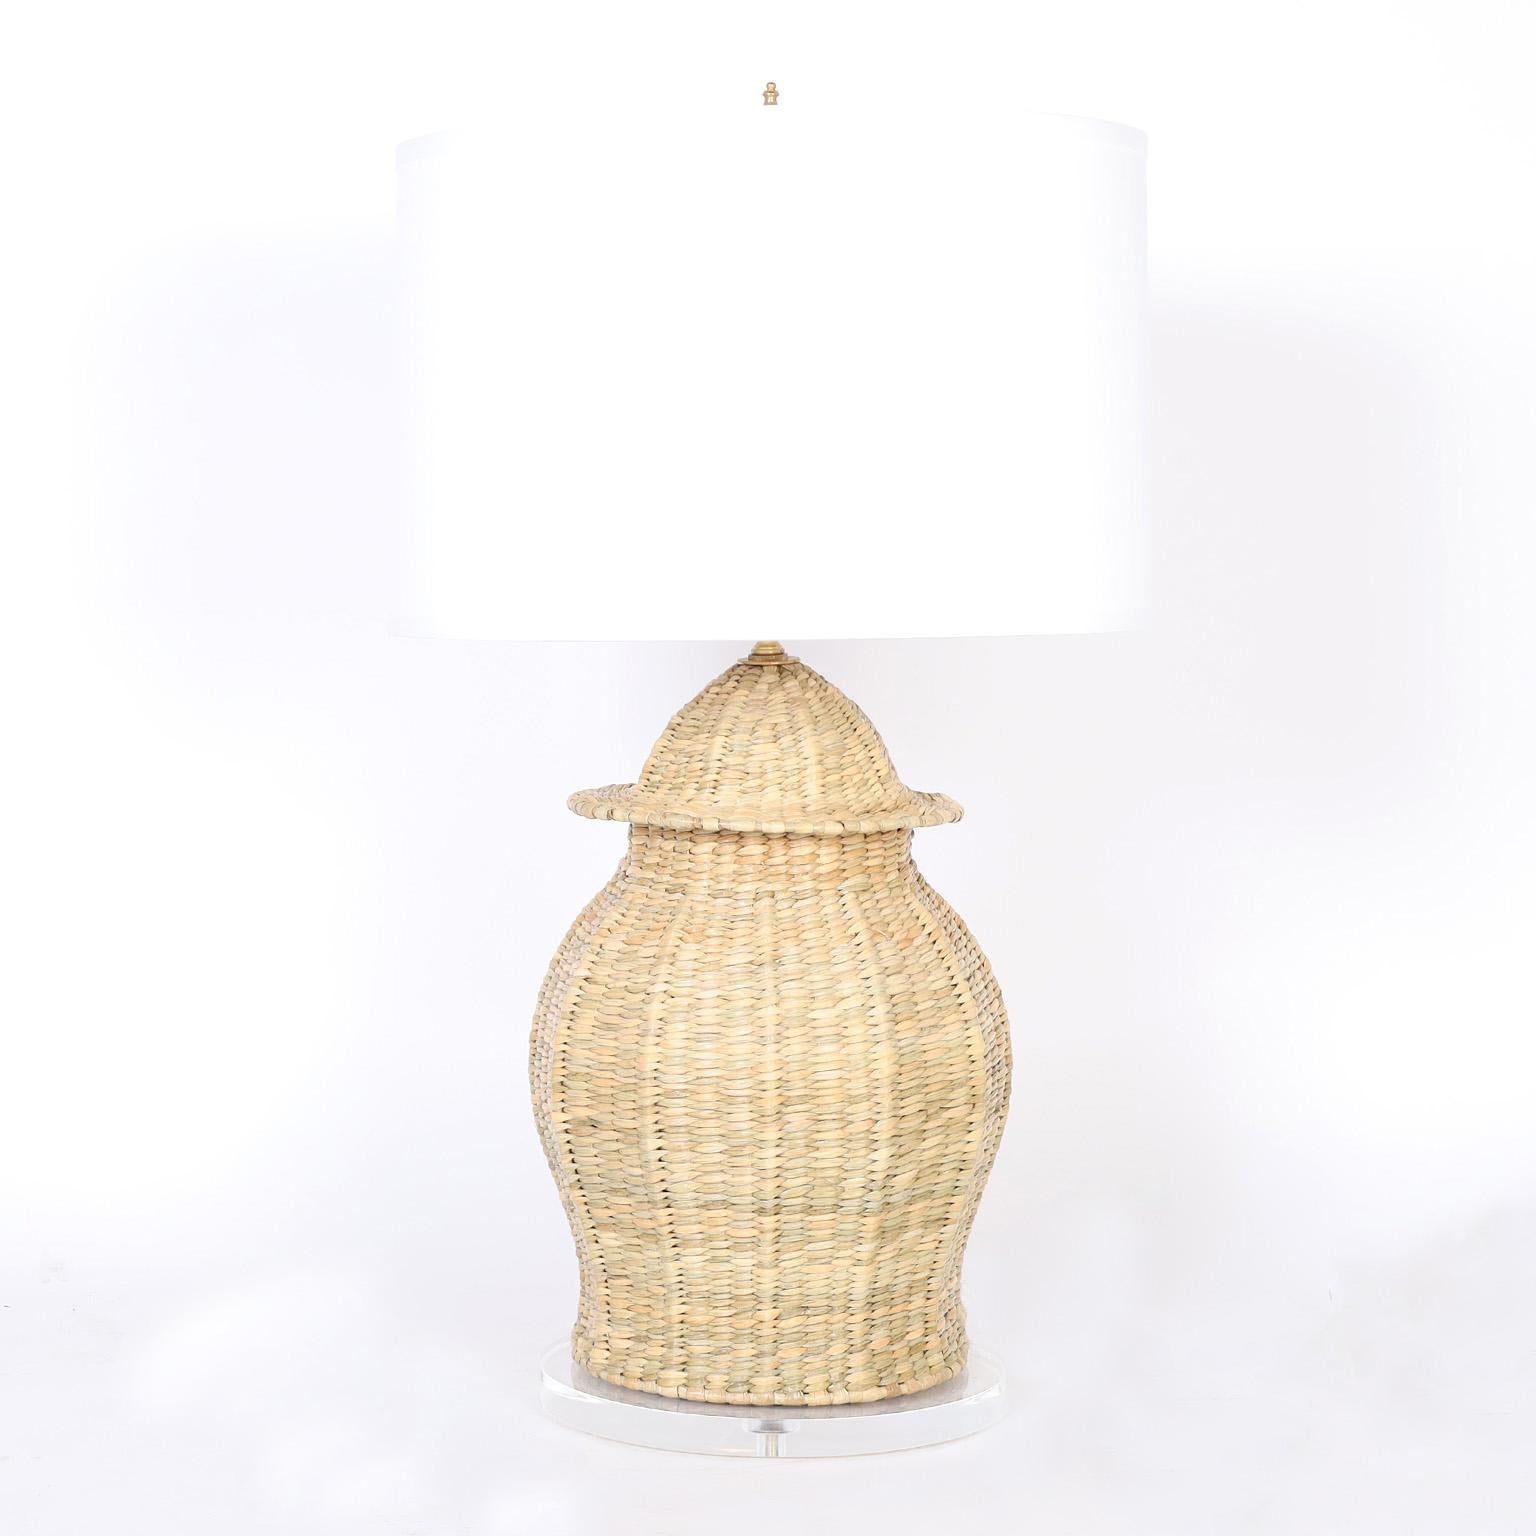 Asian modern style table lamps crafted in chuspata, much like wicker or reed in a classic ginger jar form and presented on lucite bases, from the FS Flores Collection, designed and offered exclusively by F.S. Henemader Antiques.